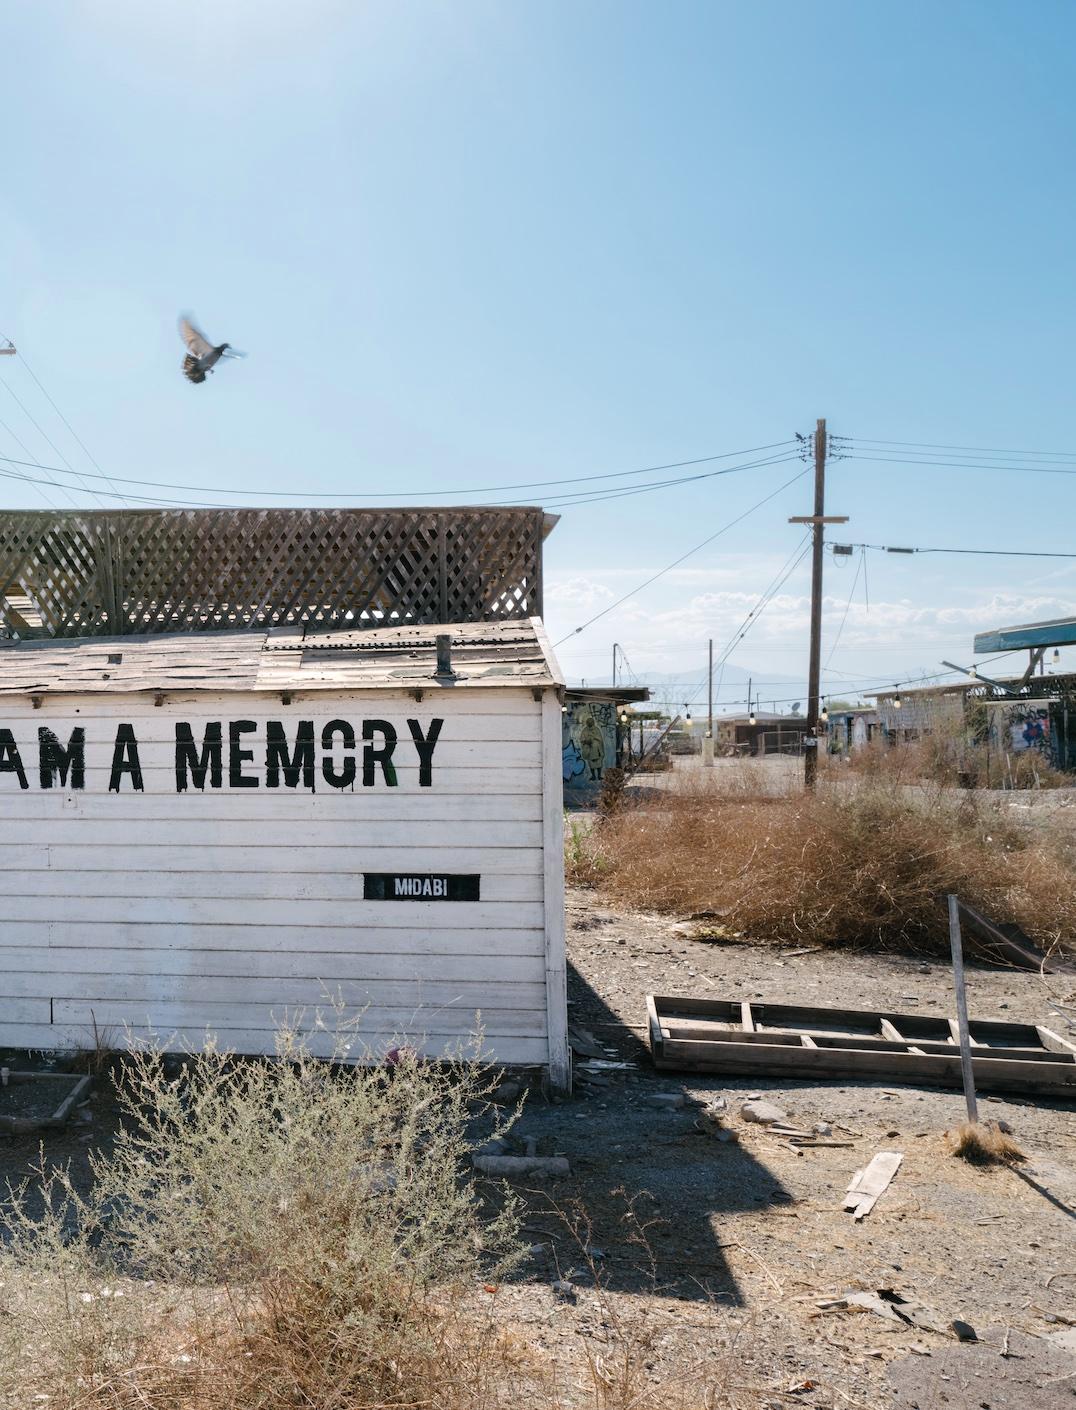 Forget, 2022, Bombay Beach, CA, USA - Photograph by Philippe Blayo